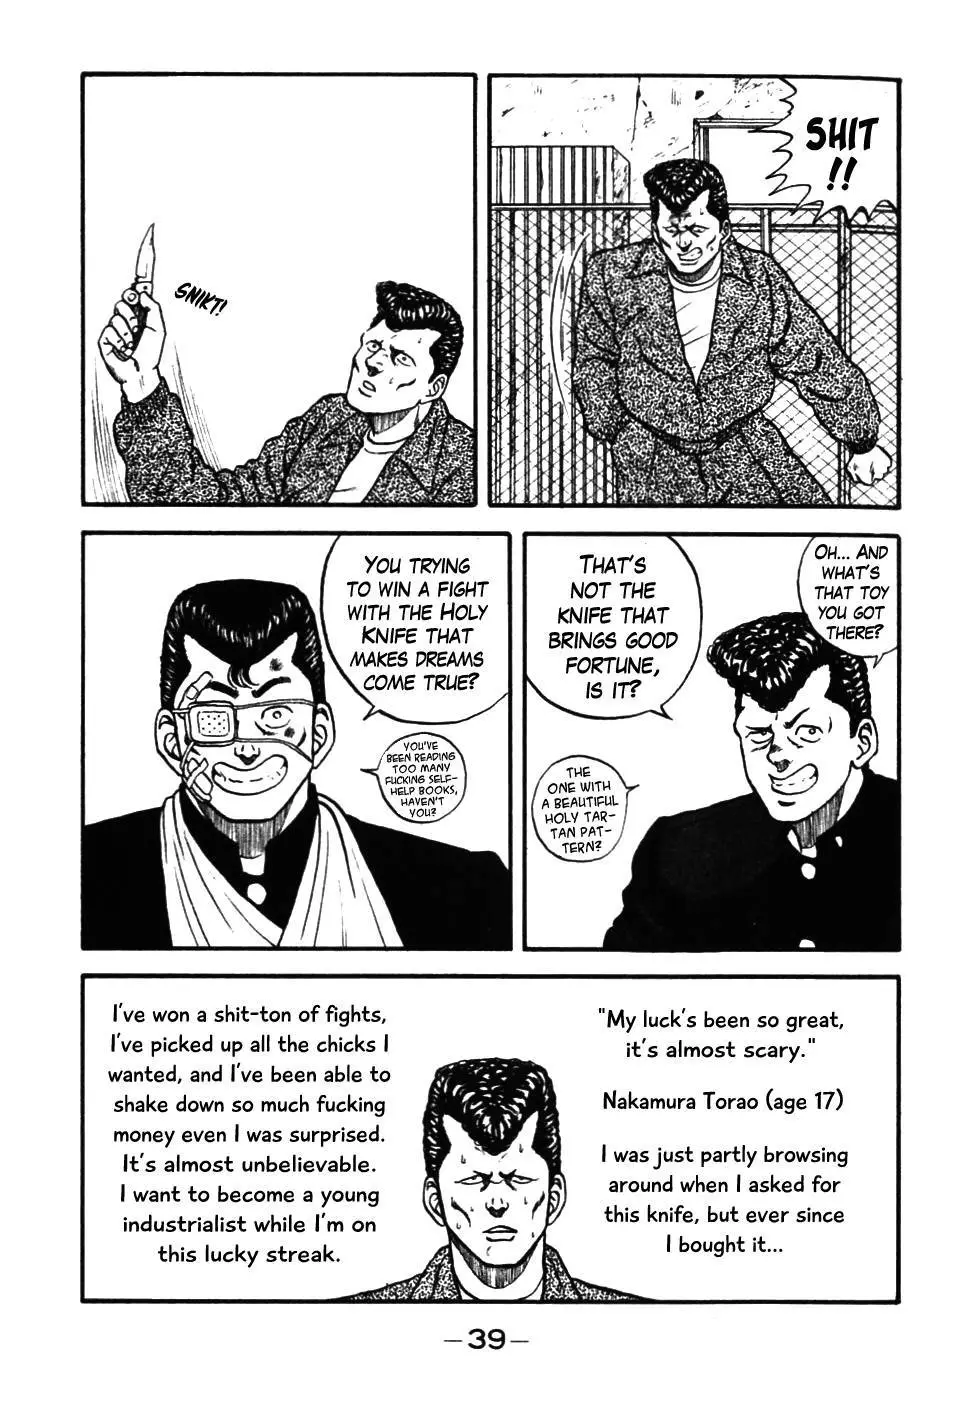 Be-Bop High School - 32 page p_00040